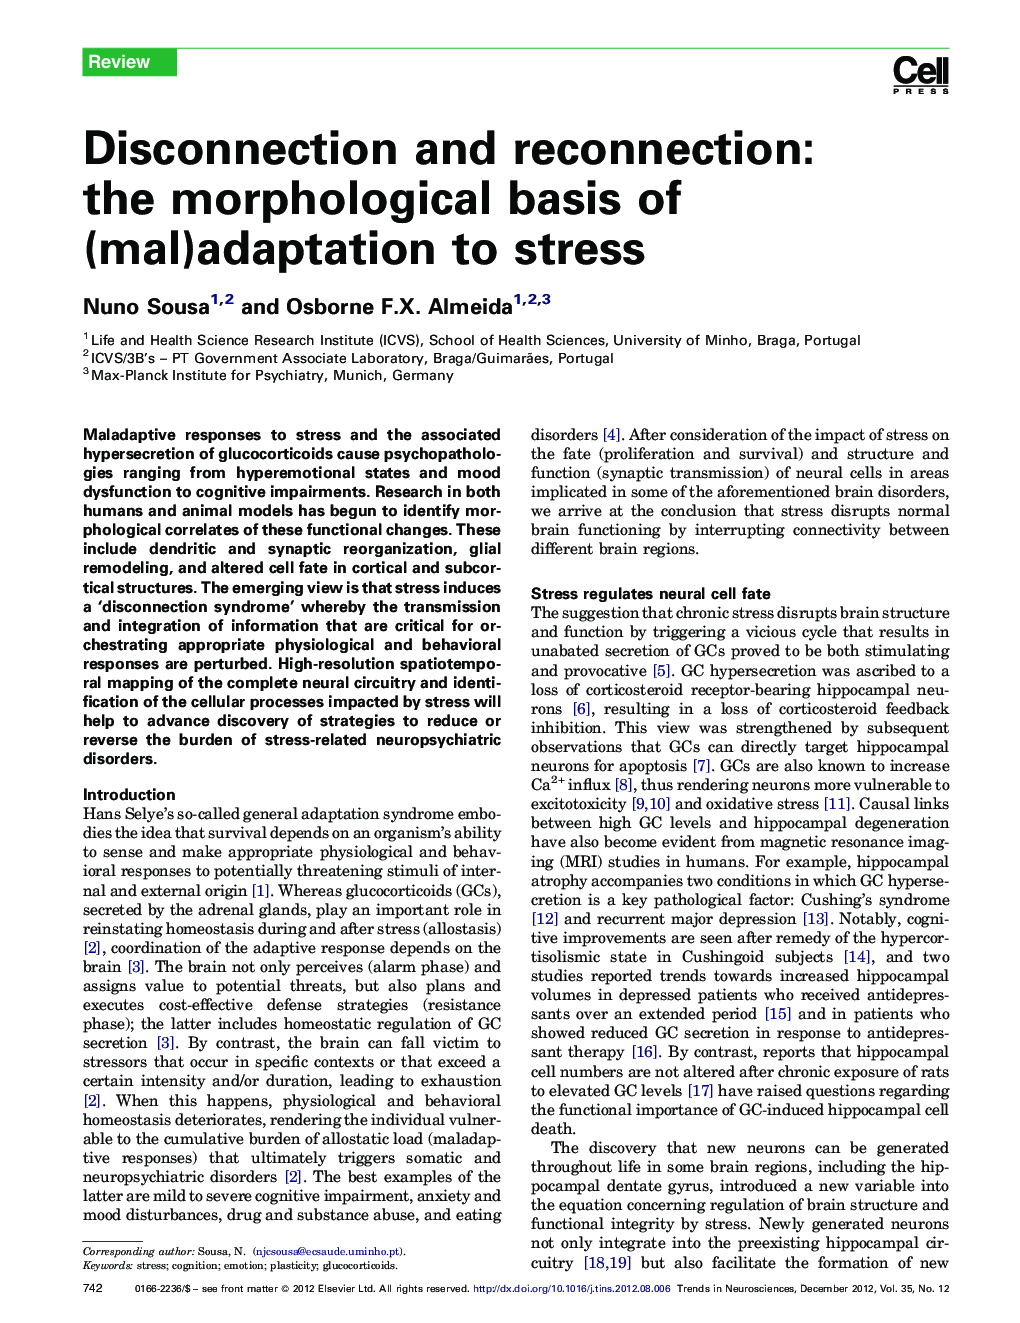 Disconnection and reconnection: the morphological basis of (mal)adaptation to stress